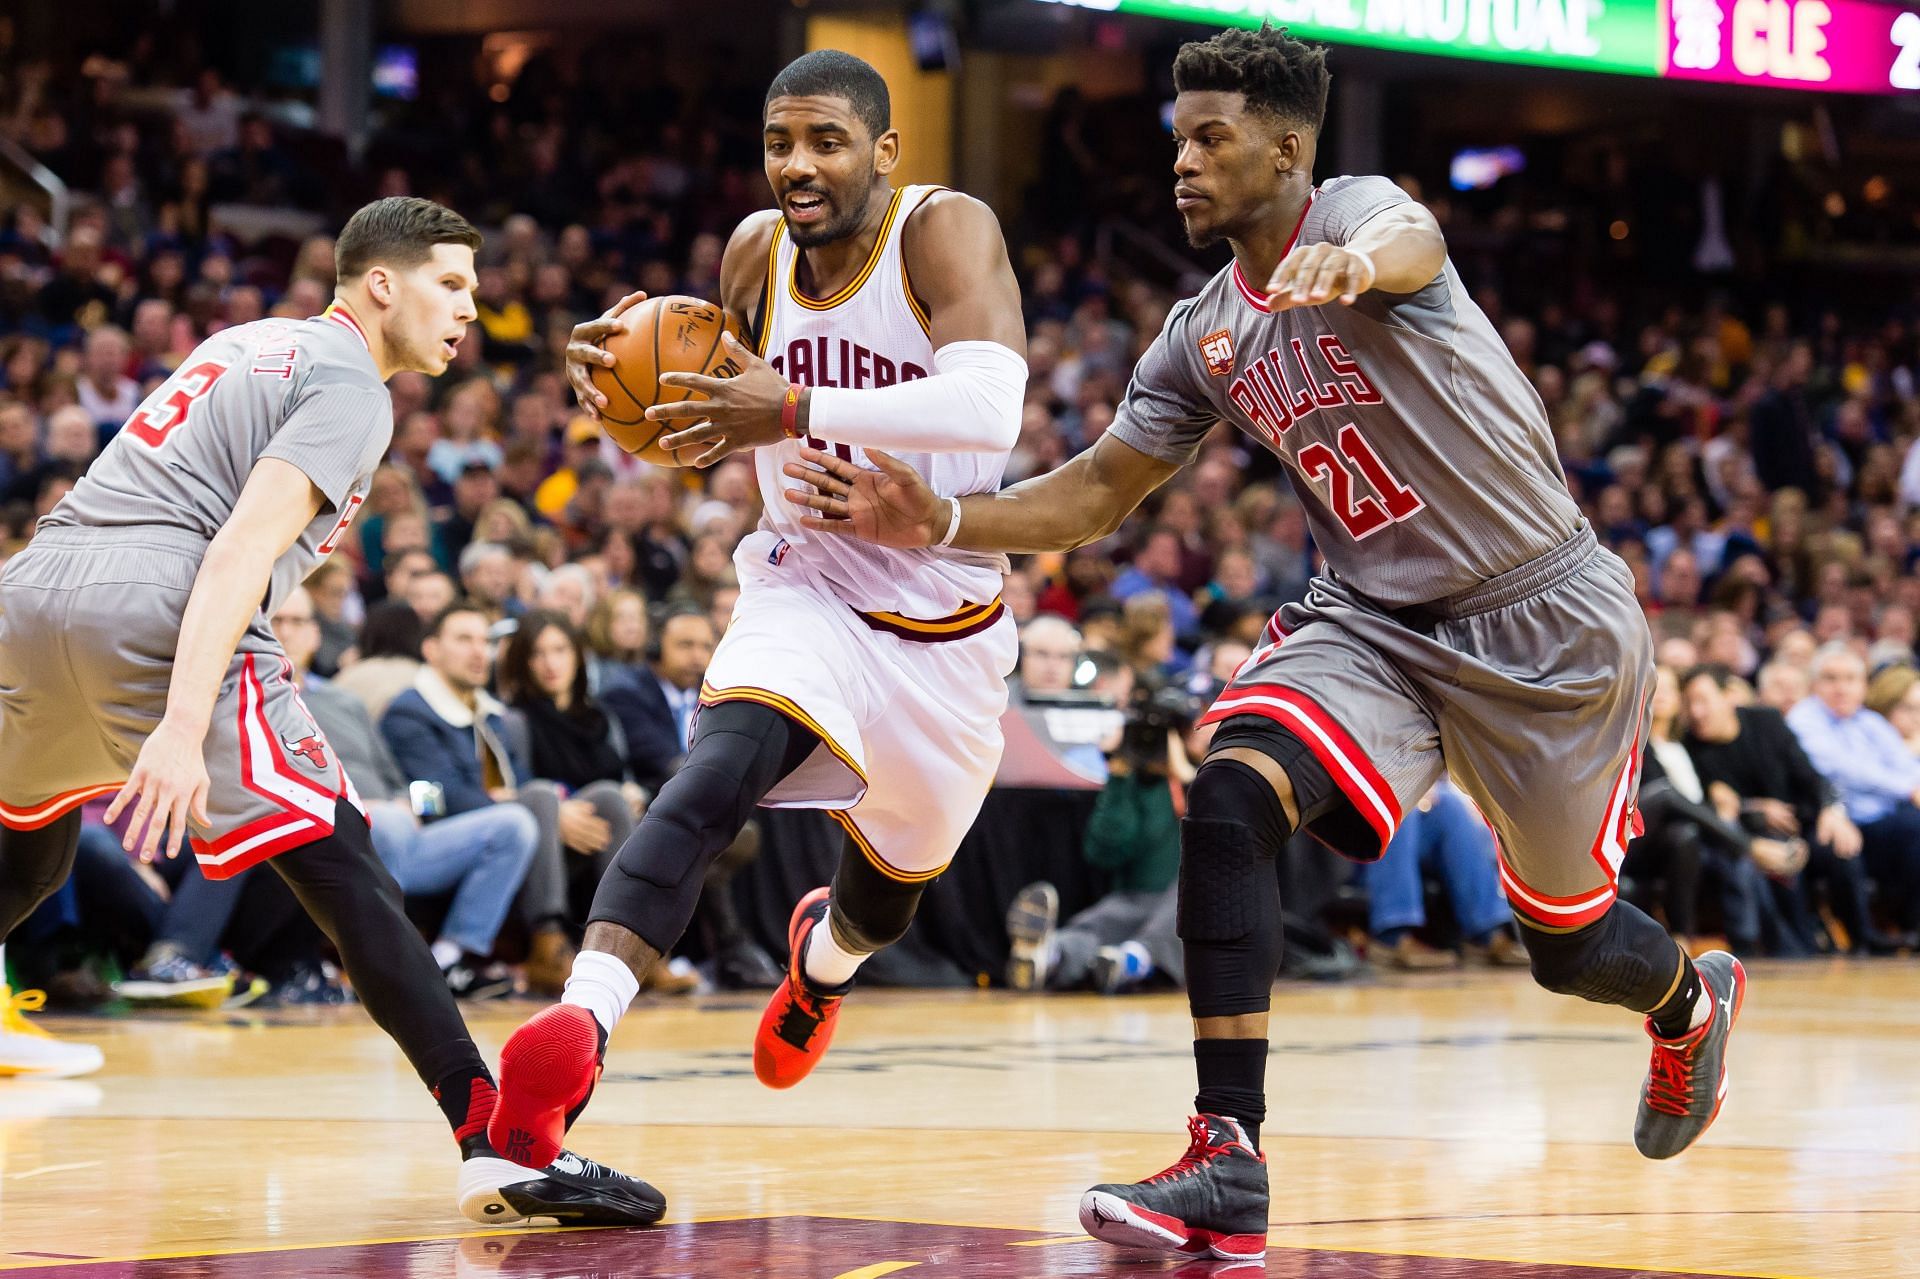 Kyrie Irving and Jimmy Butler were both drafted in 2011 (Image via Getty Images)